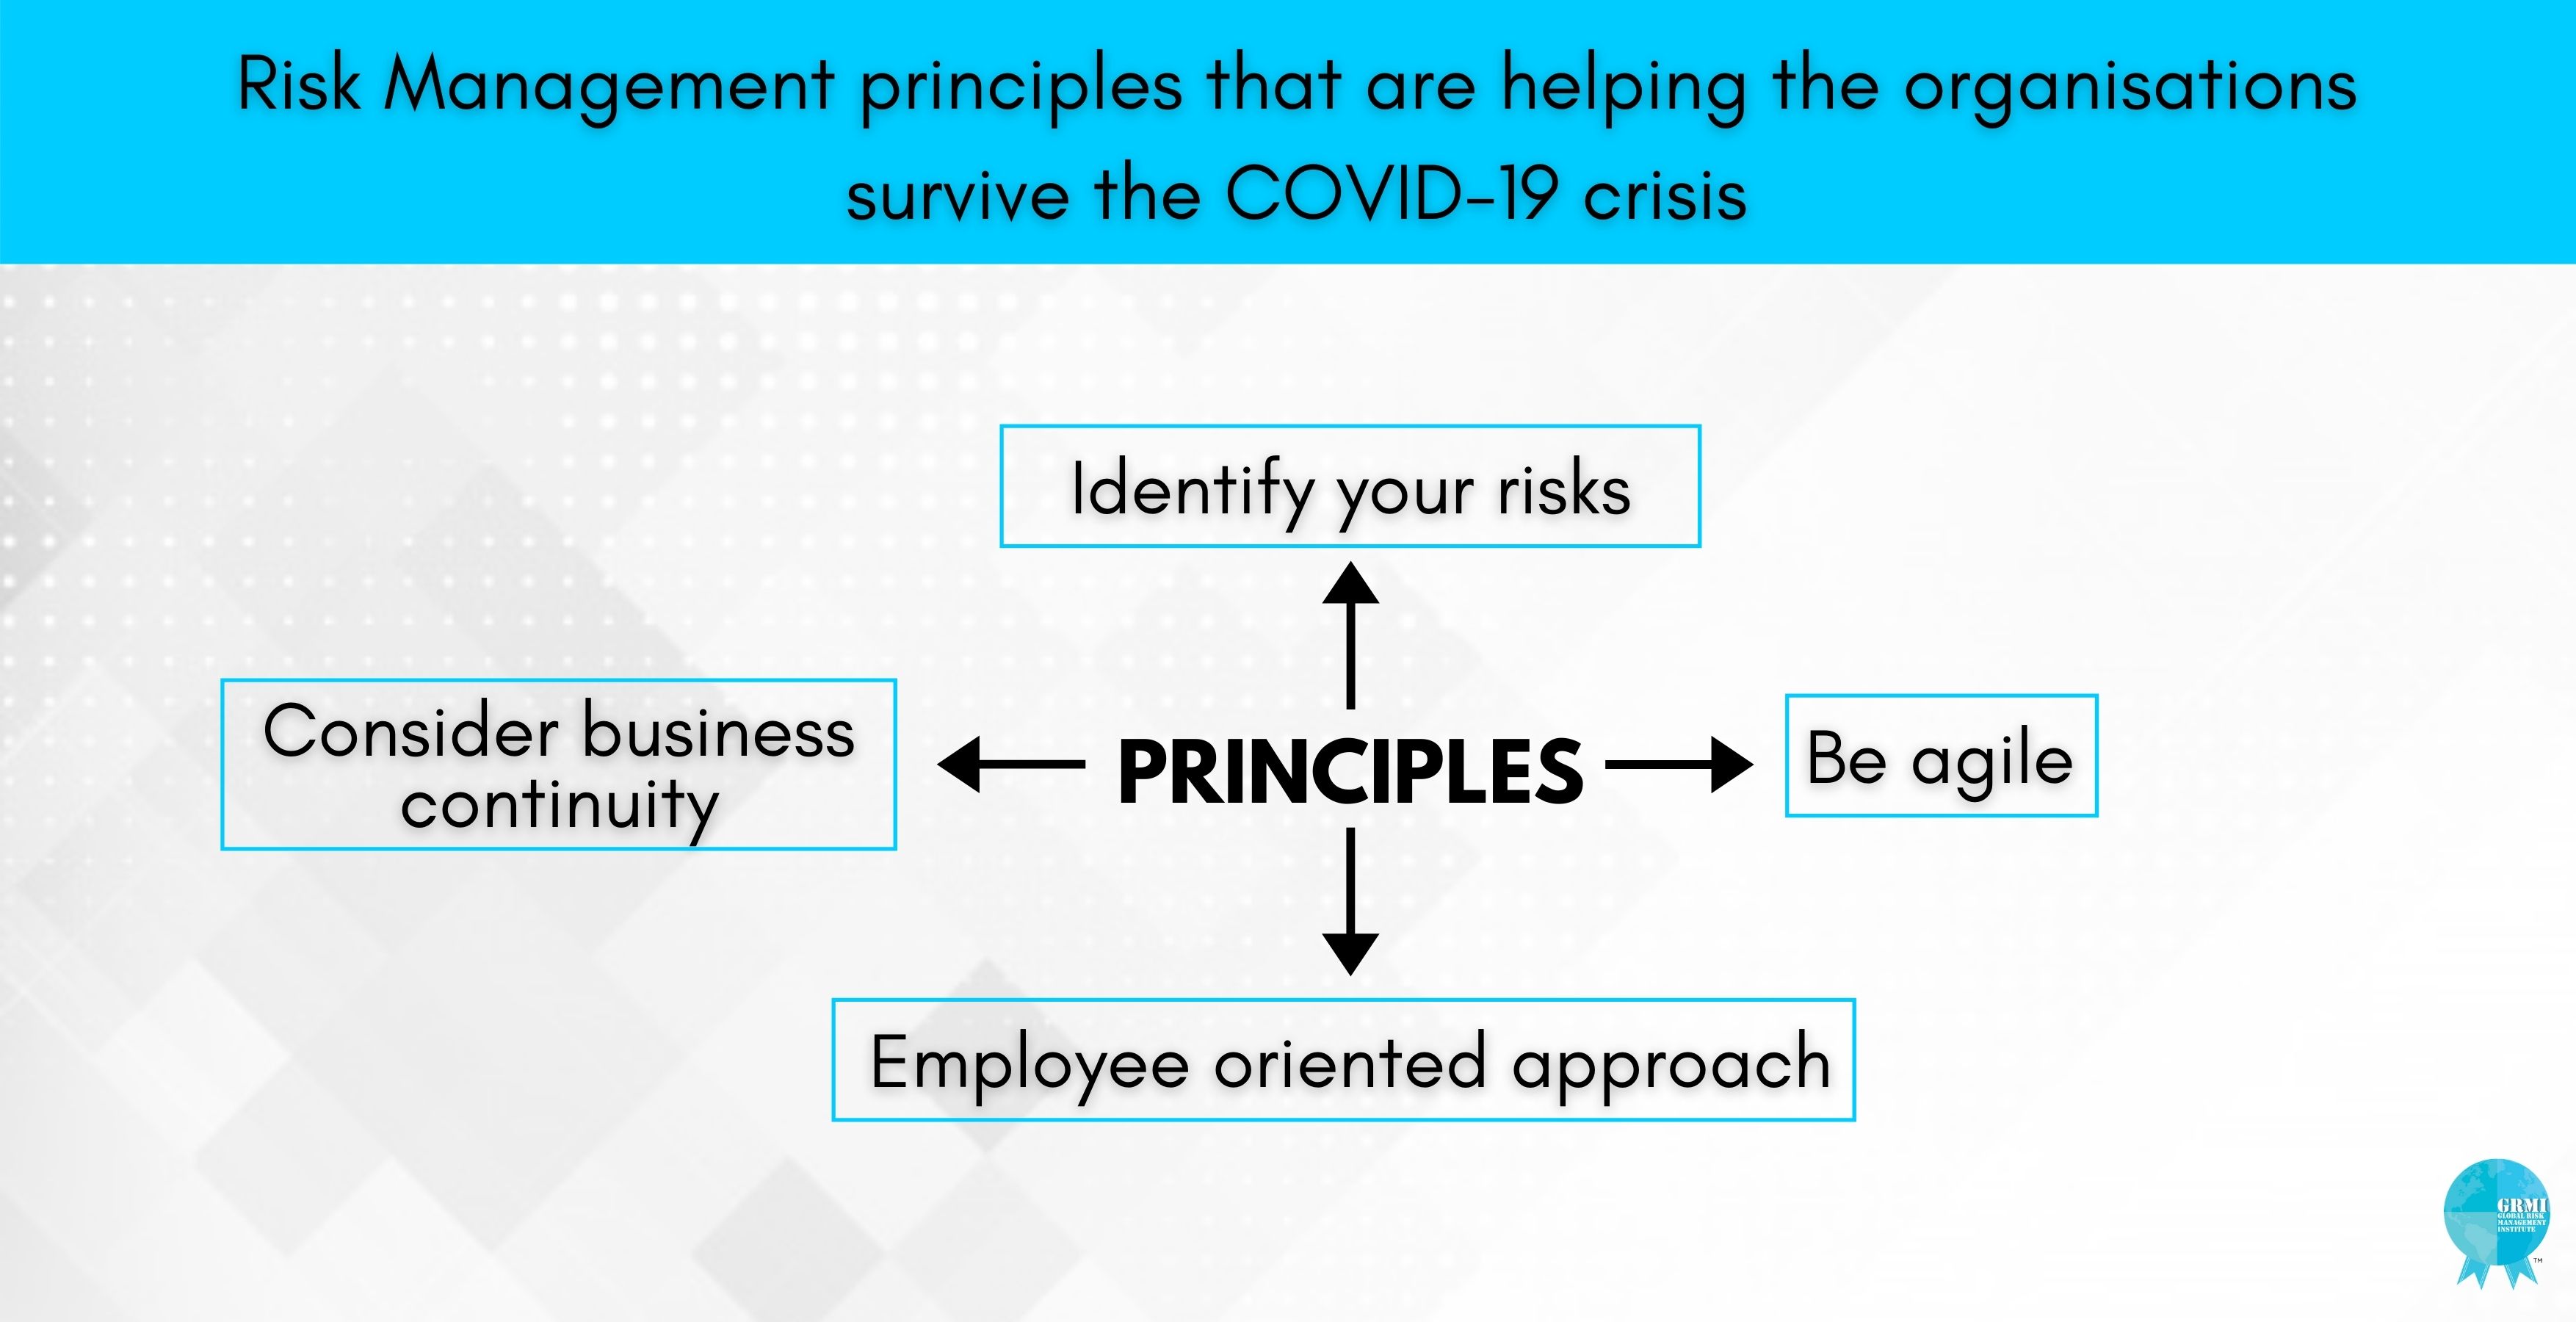 Risk Management during COVID-19